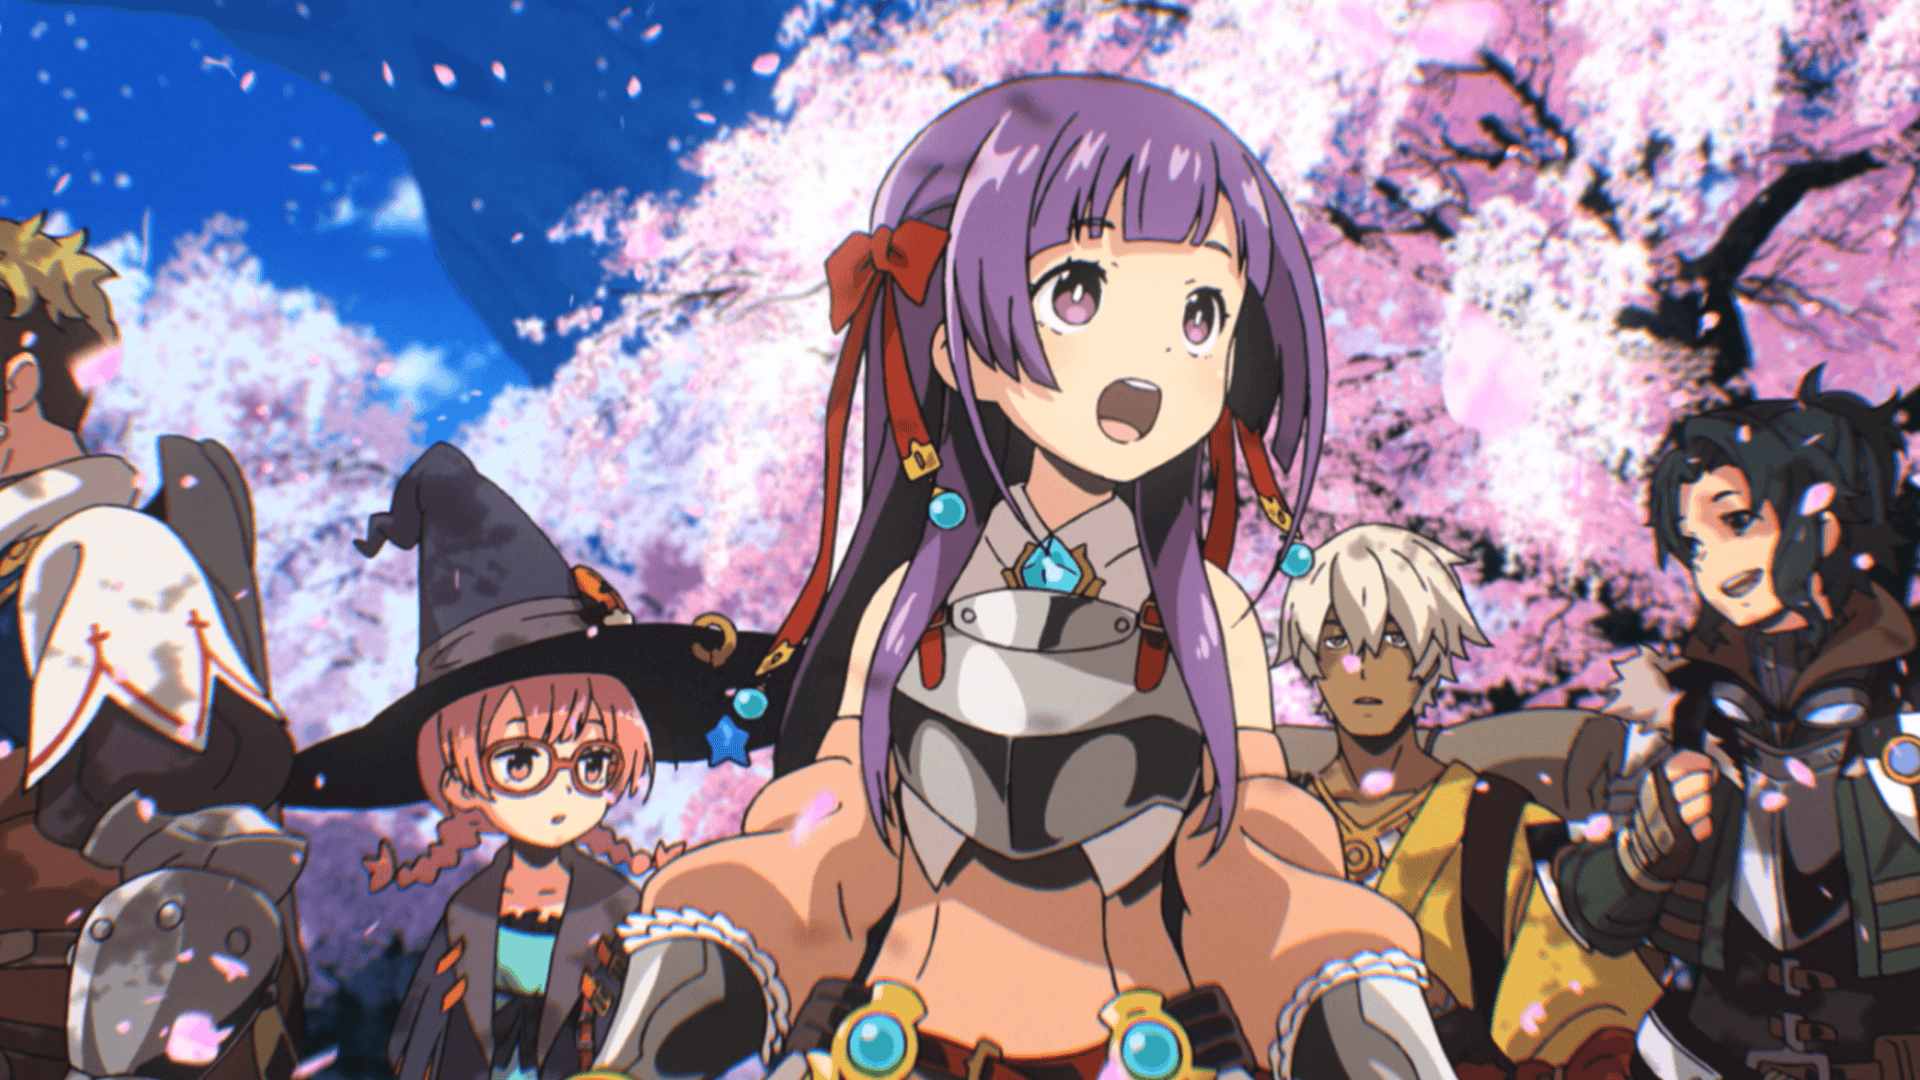 Etrian Odyssey 2 Untold: The Fafnir Knight Review (3DS) Poor